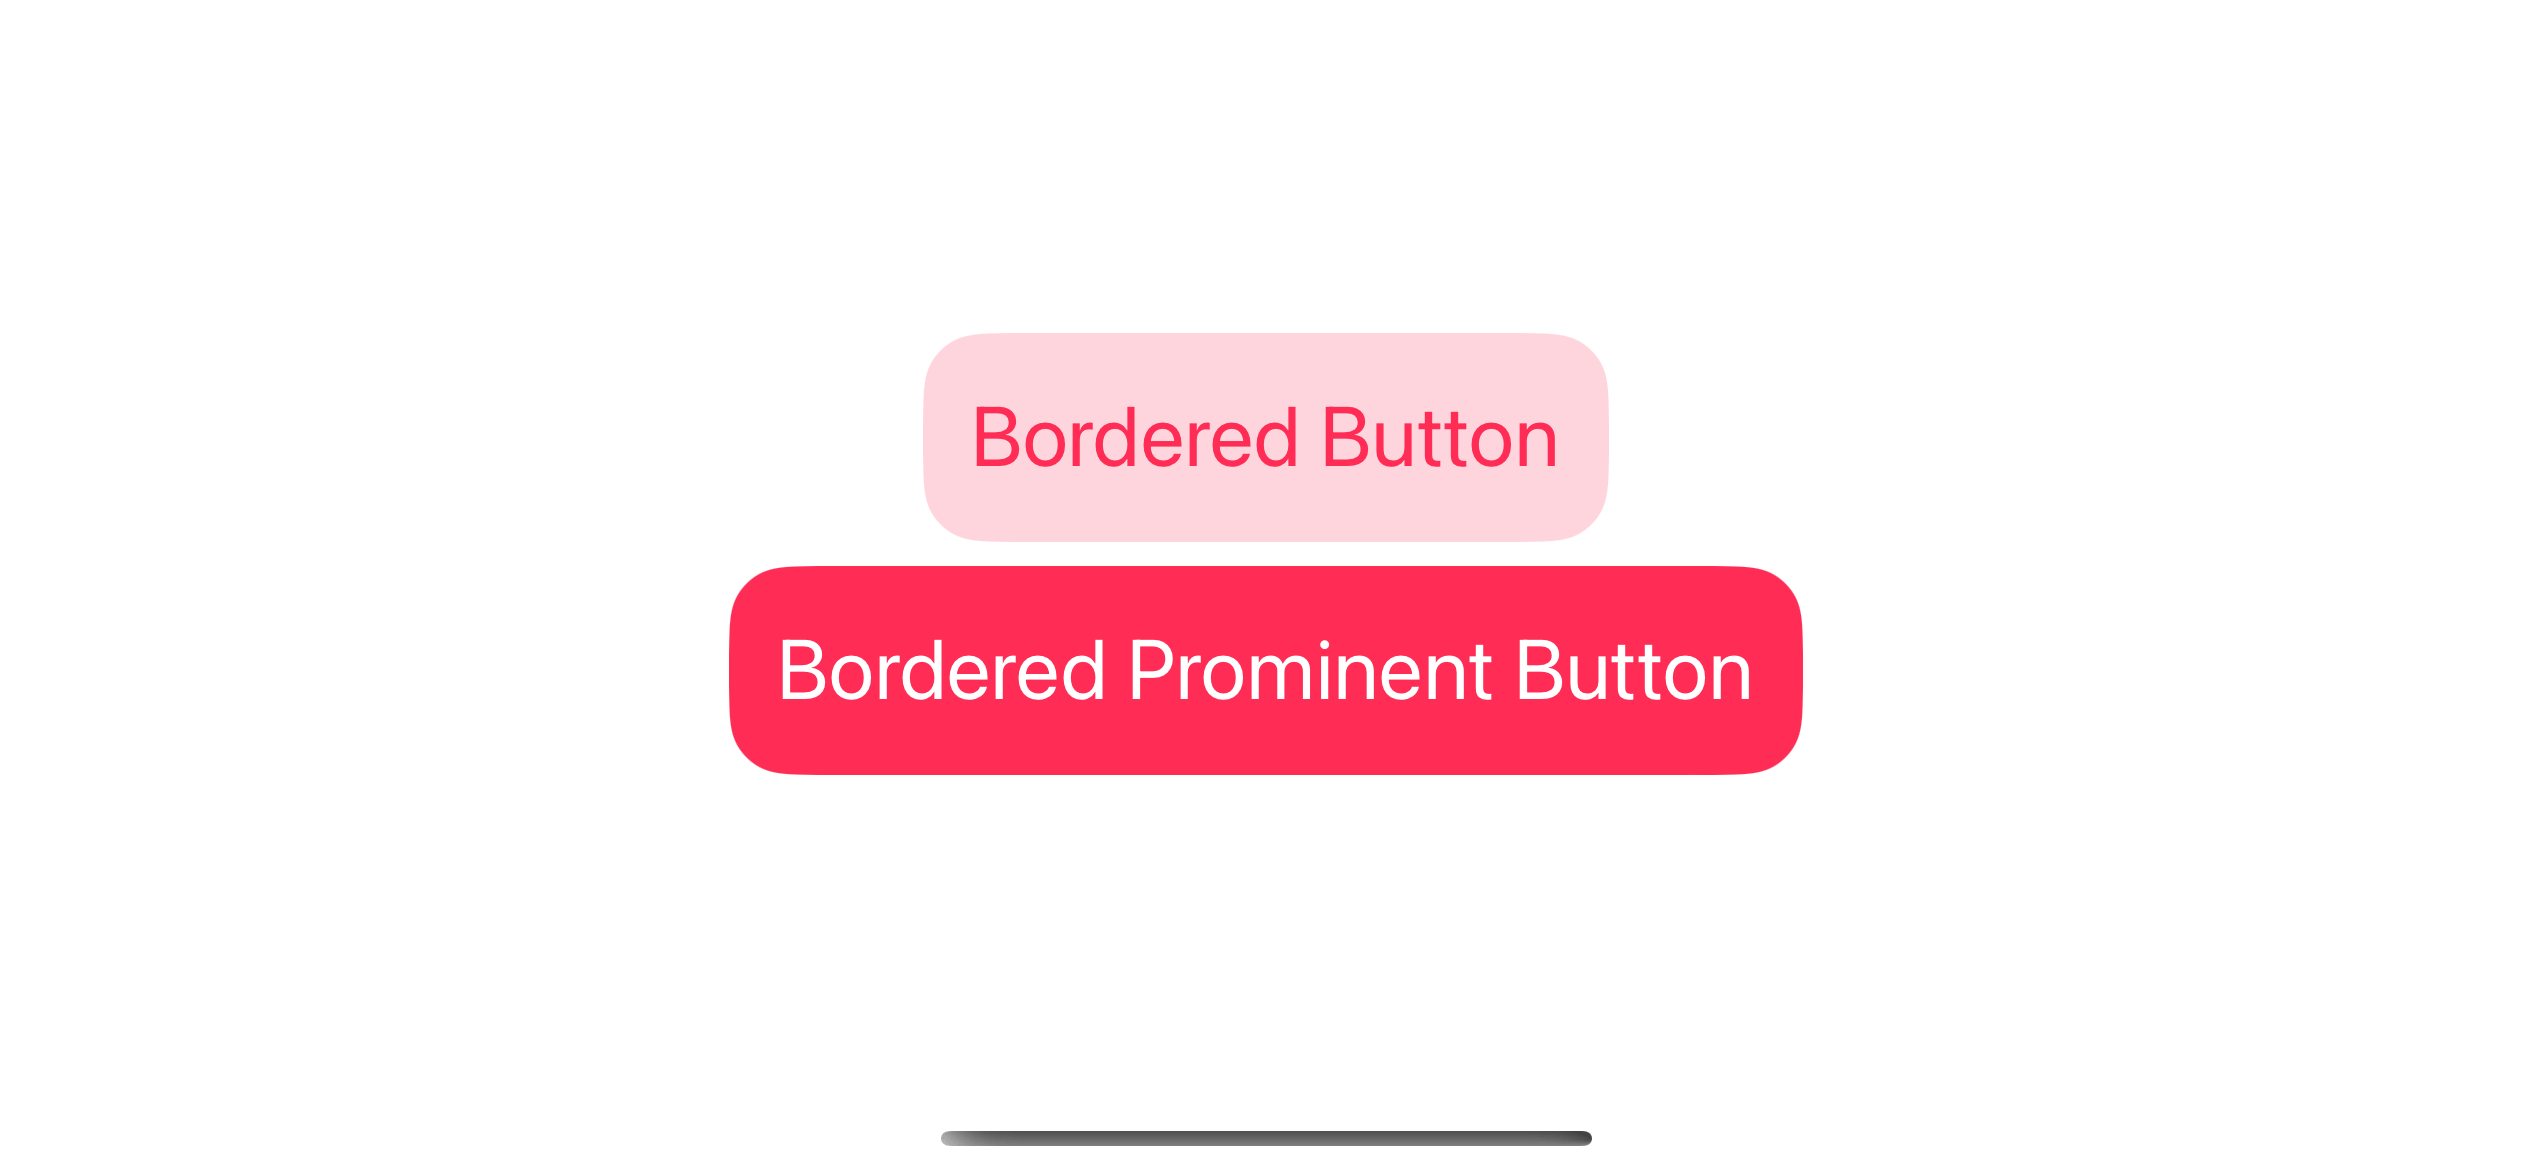 A replicate of bordered and bordered prominent button styles.